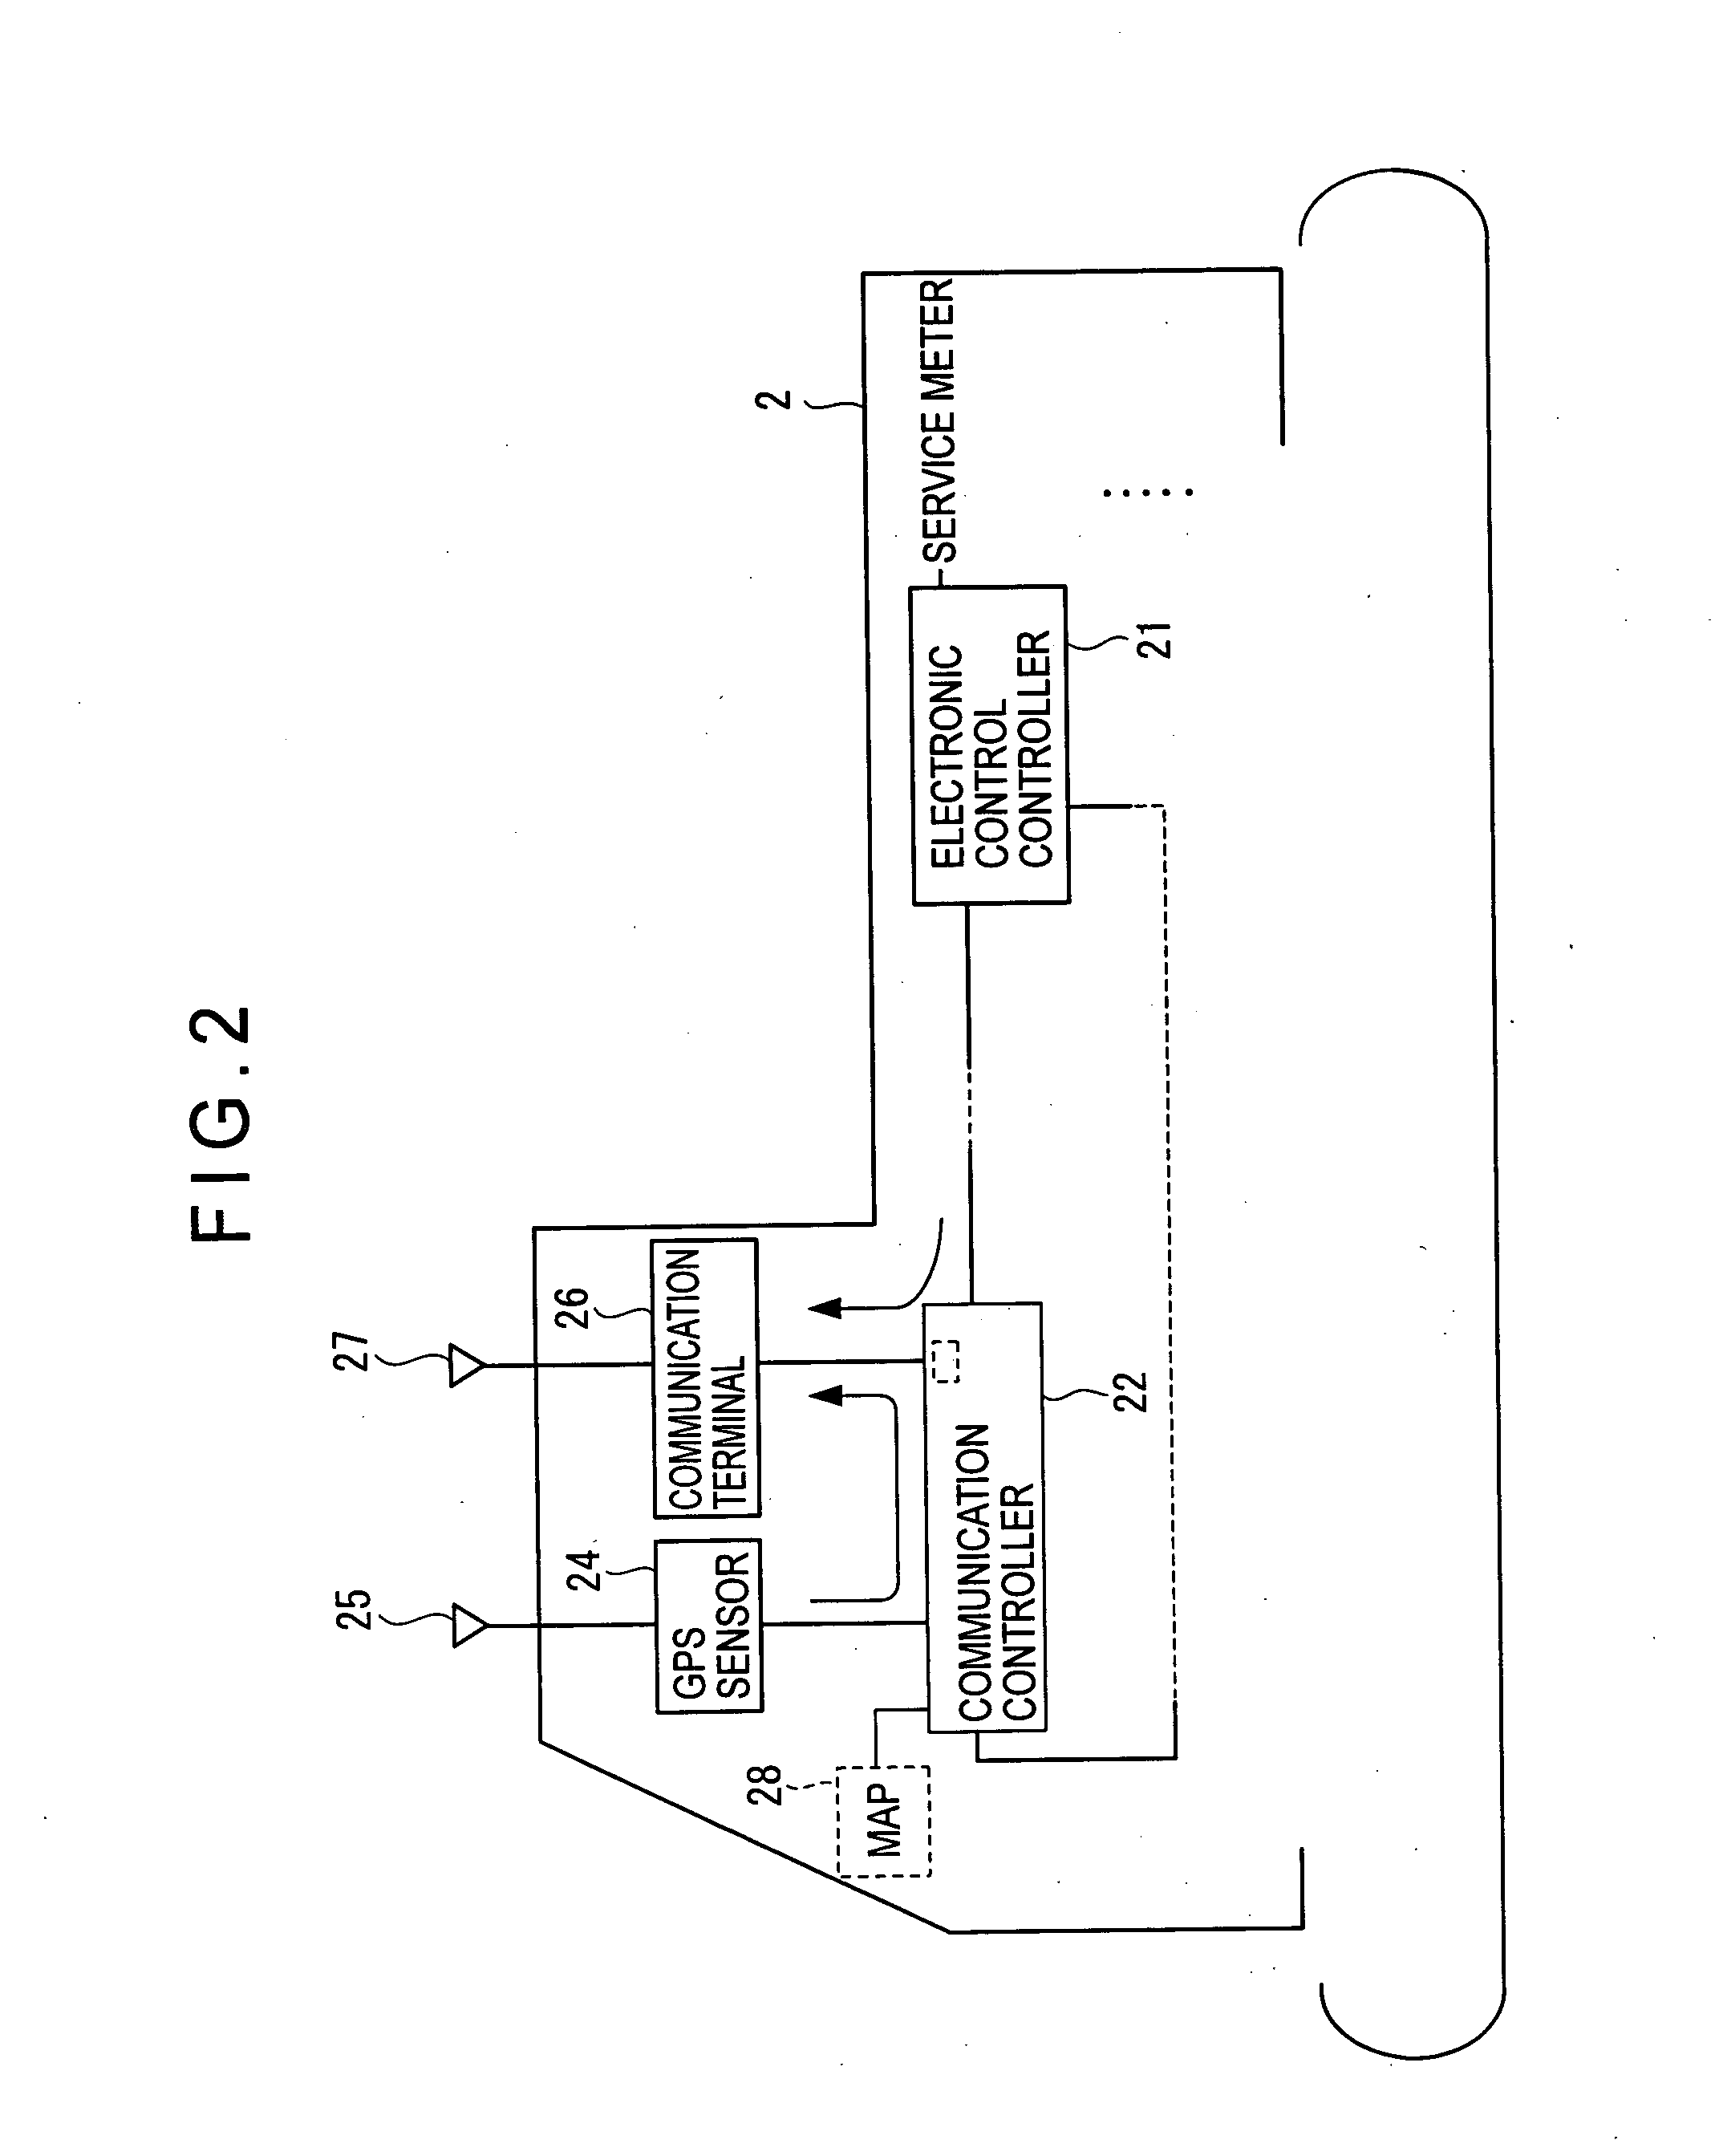 Supplemental parts production forecasting system, supplemental parts production forecasting method, and program for the same